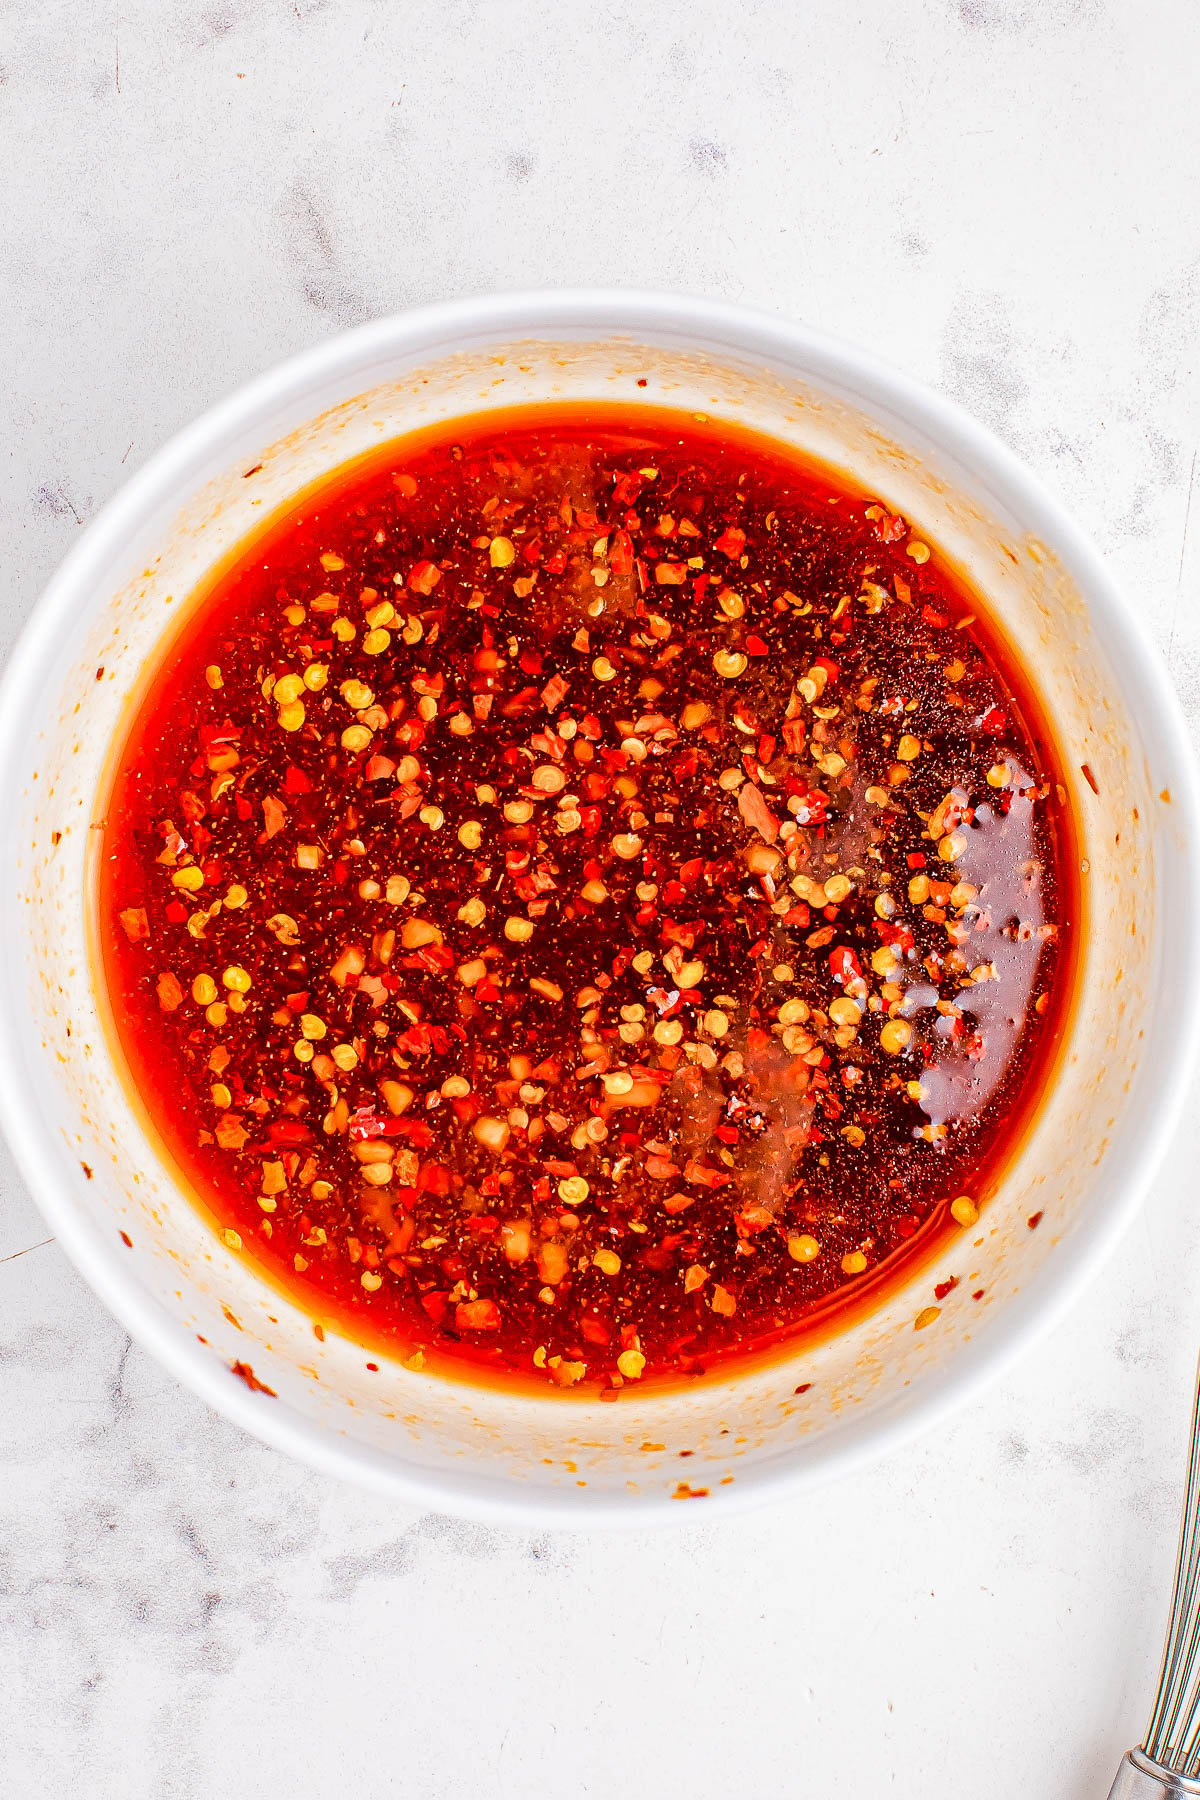 A bowl of chili sauce with floating chili flakes and seeds on a white surface.